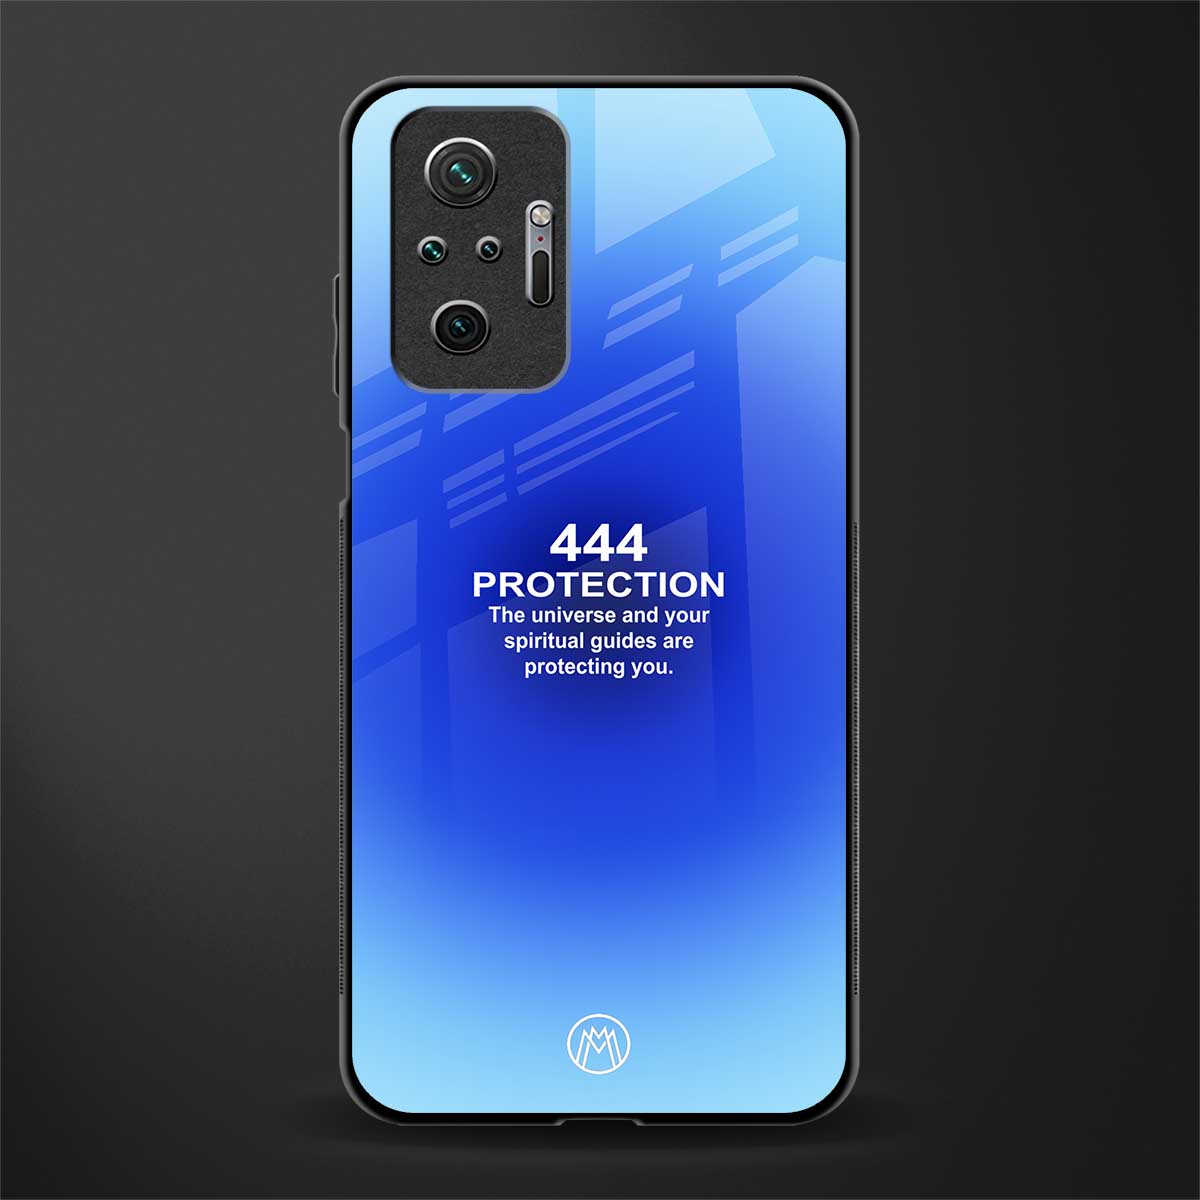 444 protection glass case for redmi note 10 pro image